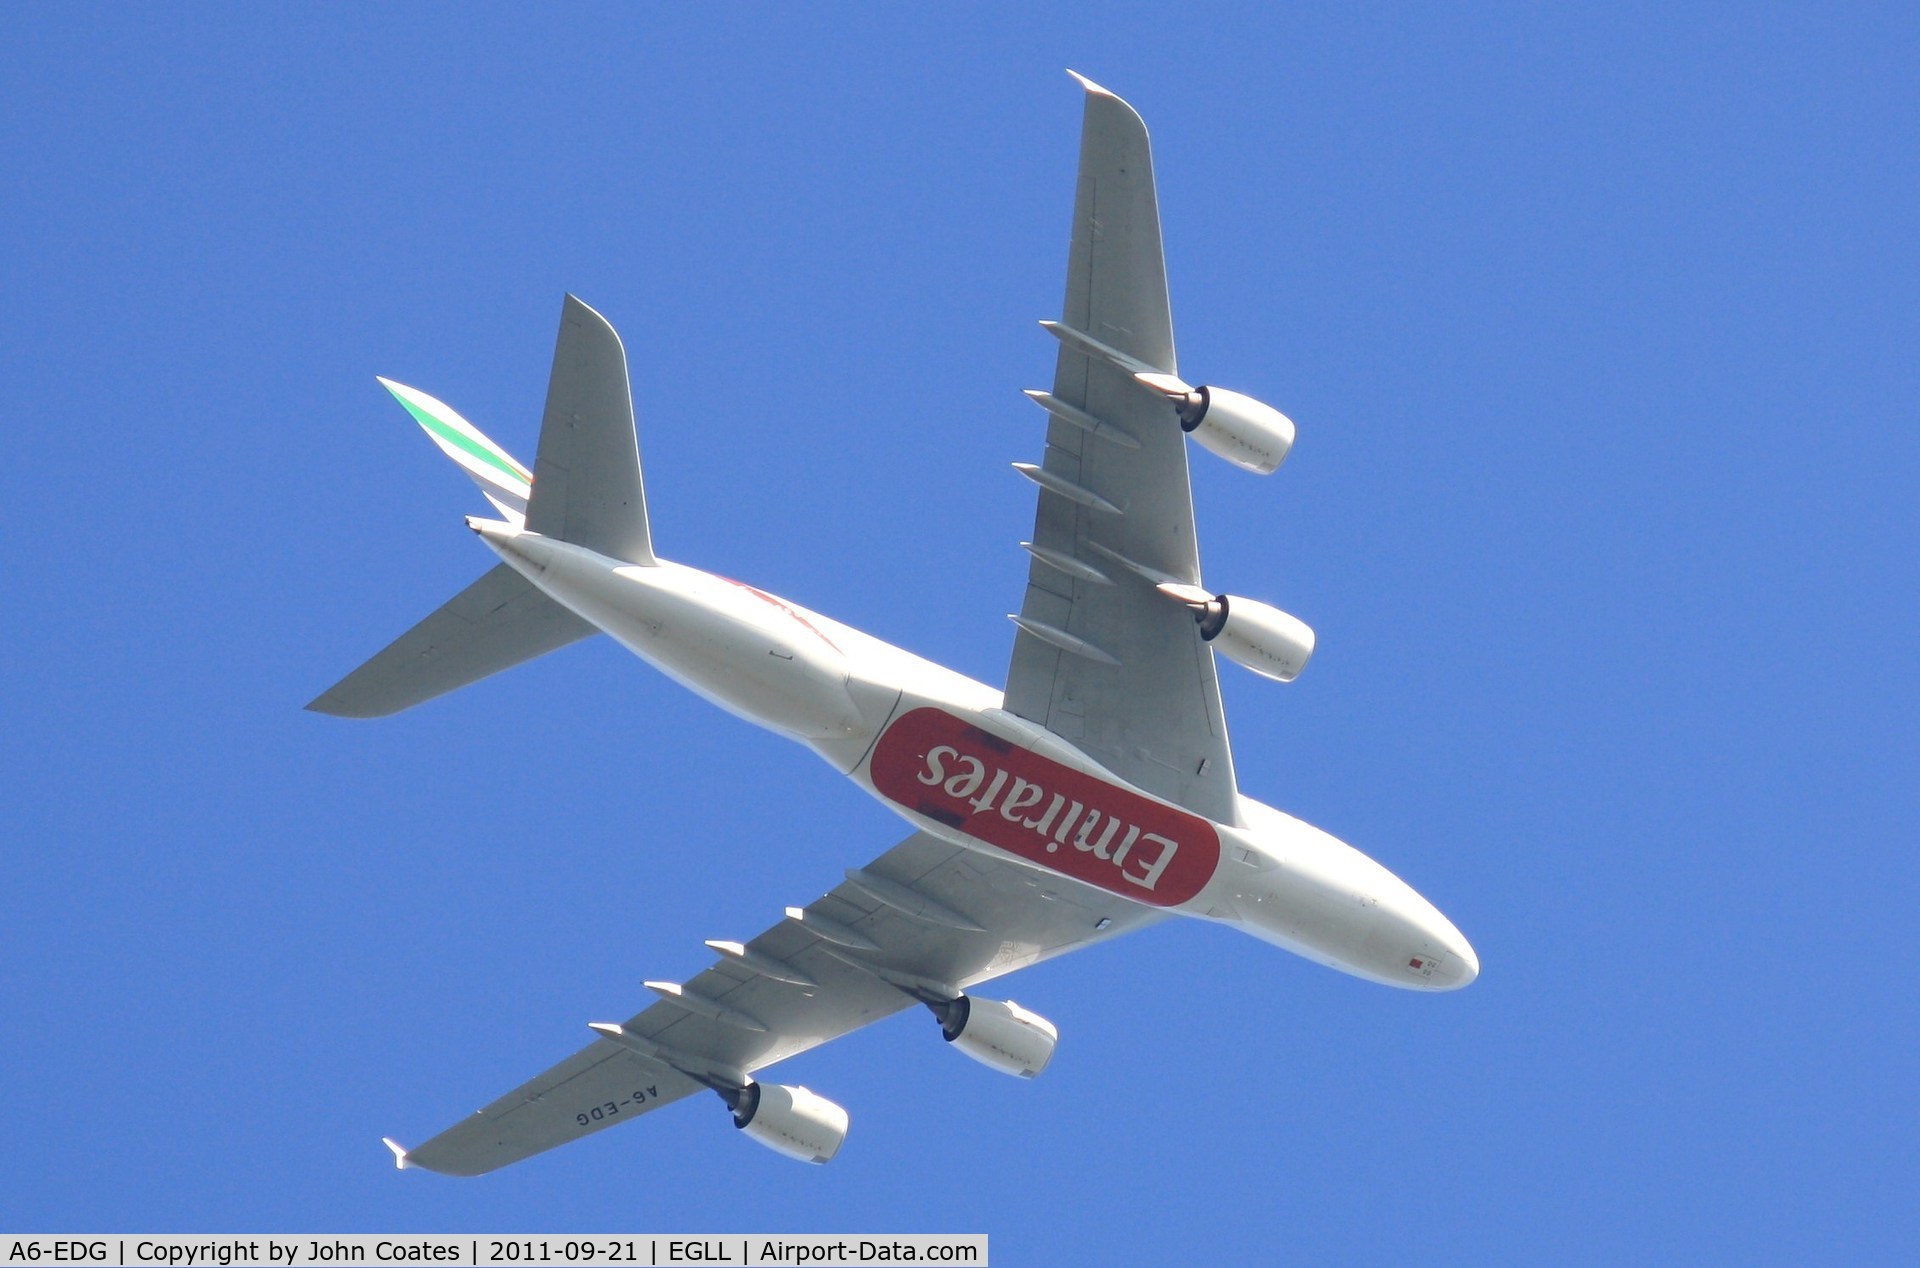 A6-EDG, 2009 Airbus A380-861 C/N 023, Climbing out of Heathrow over Chertsey